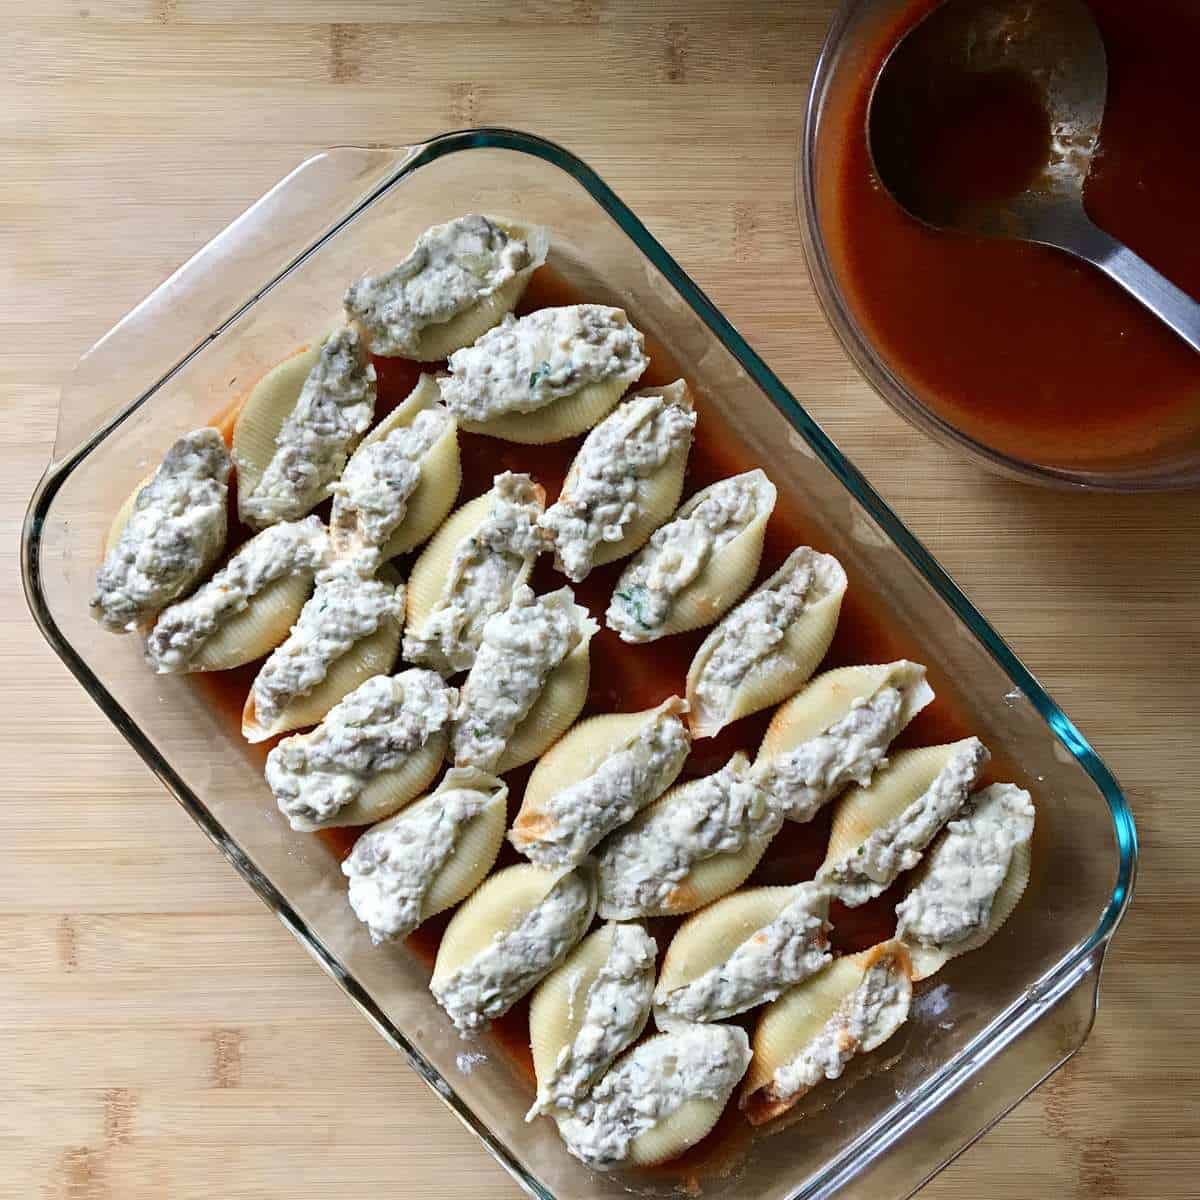 The filled pasta shells in a baking dish.